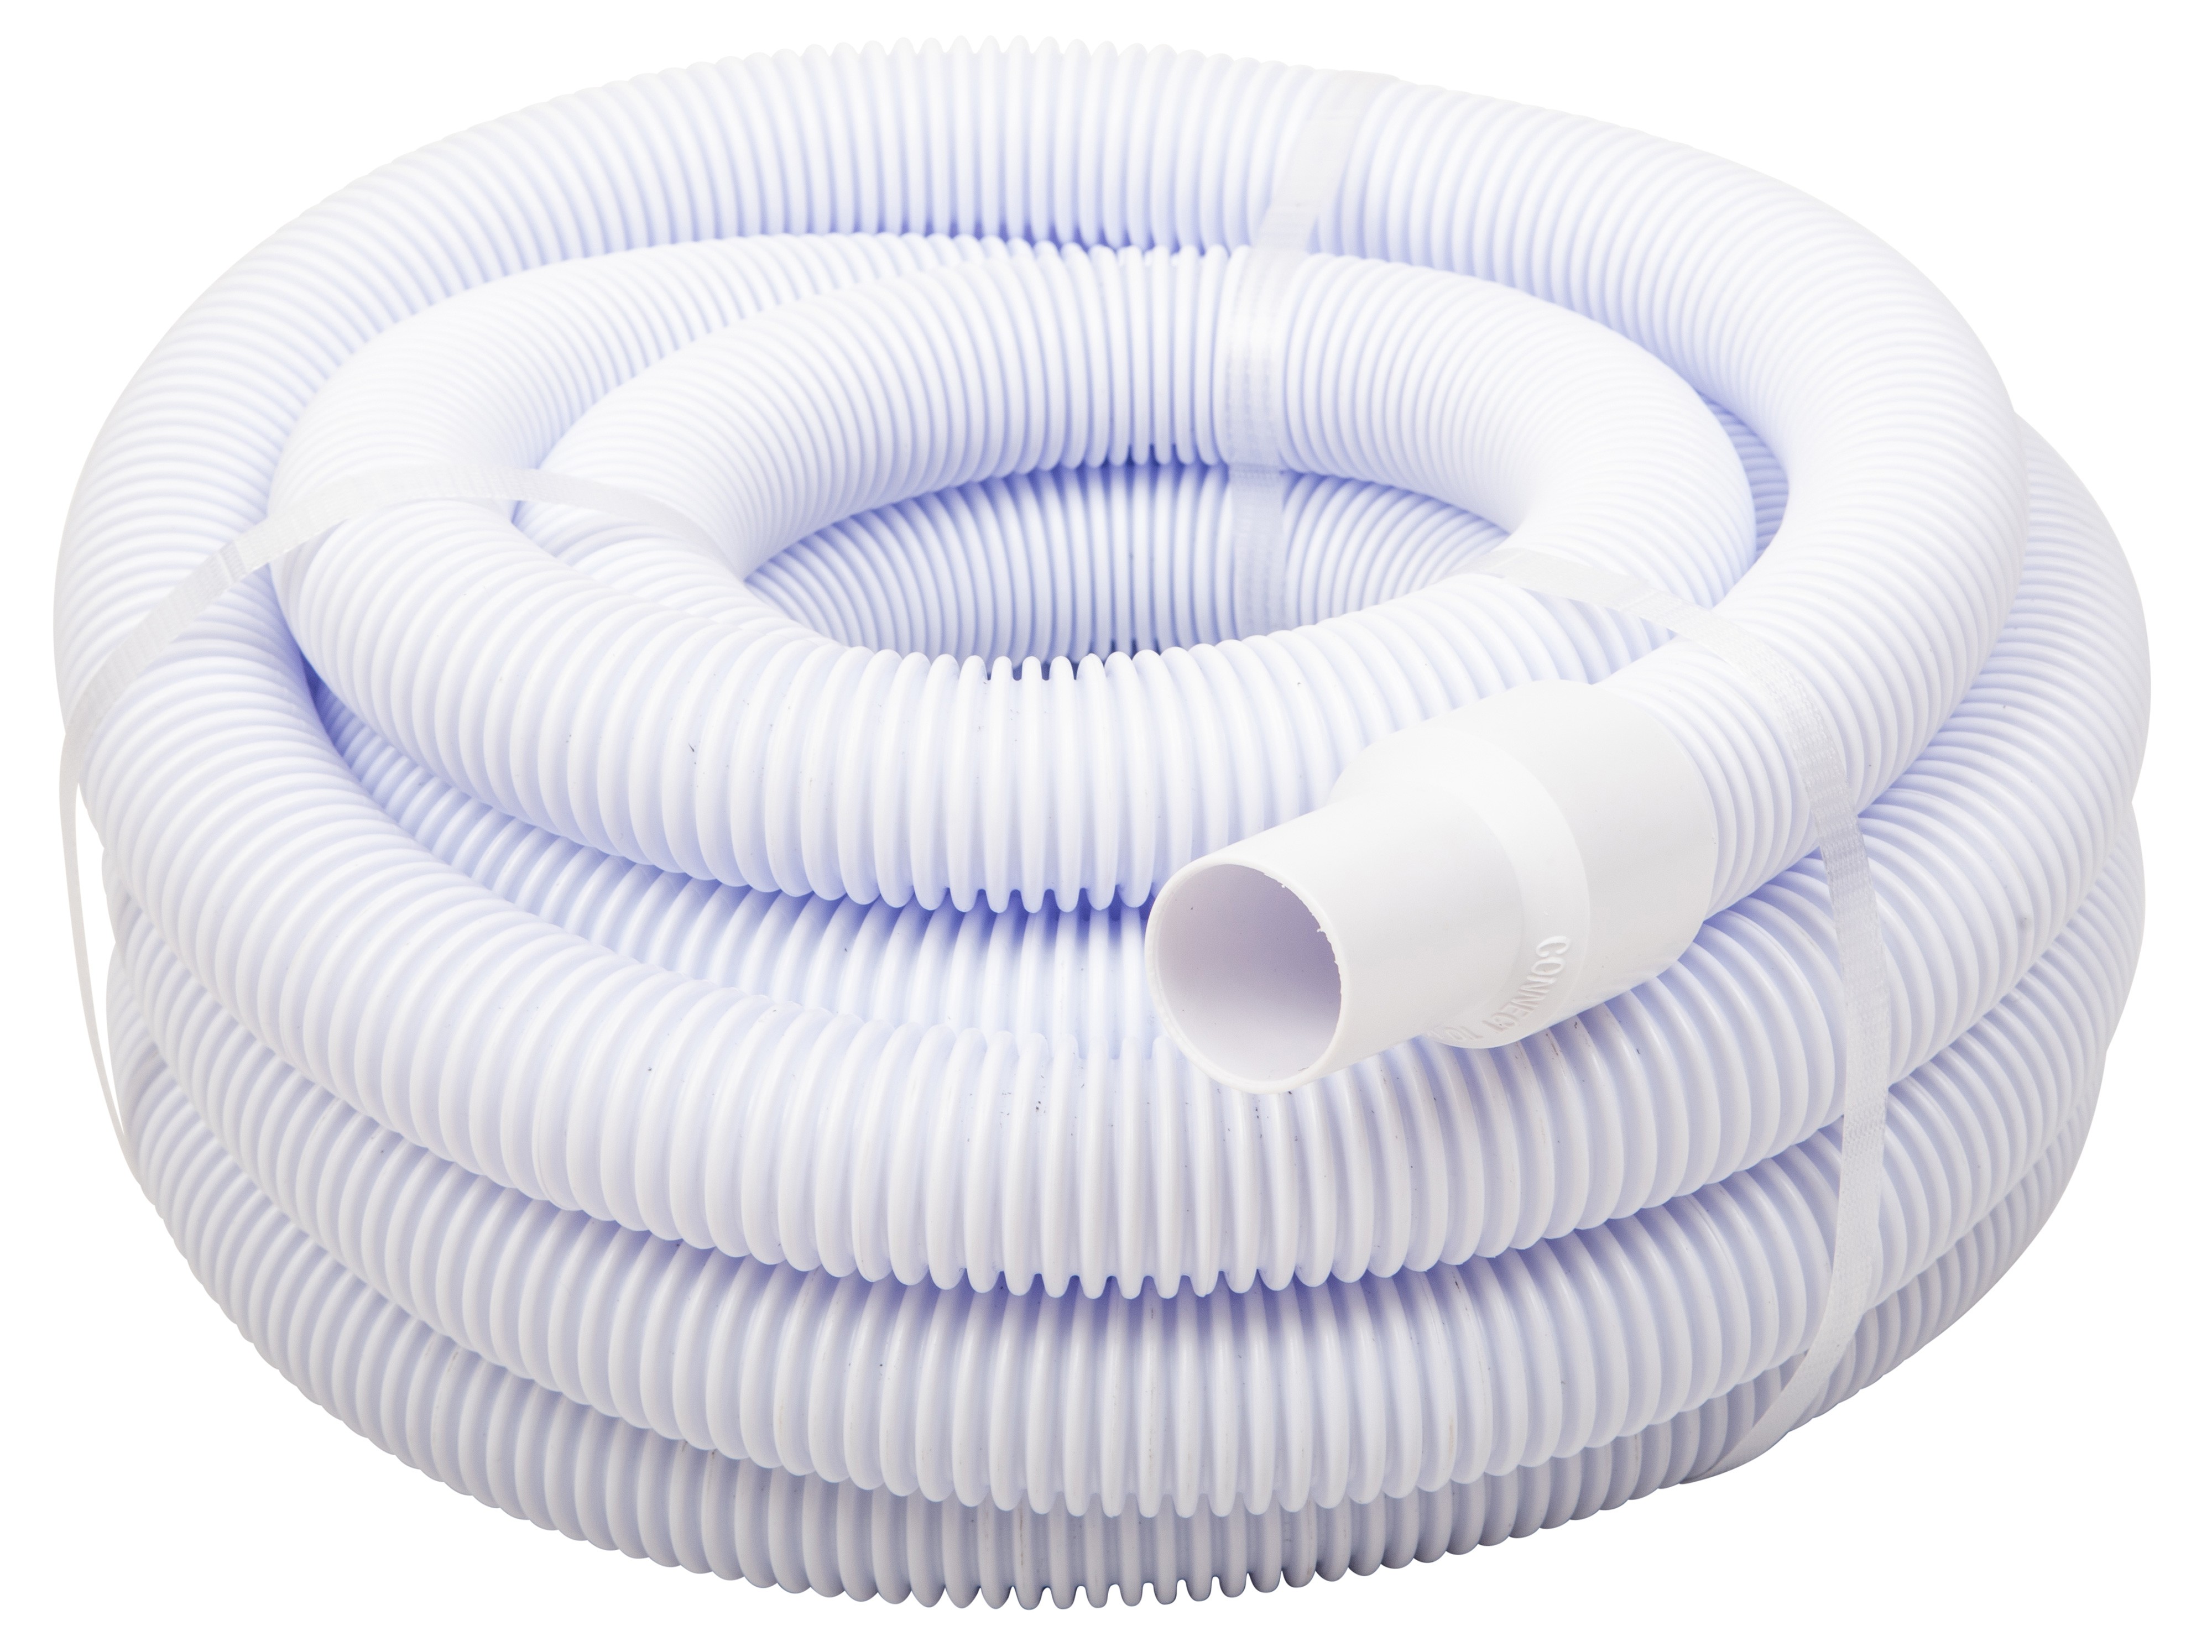 Swimming Pool Vacuum Hose 1.5" 40 foot length with Swivel End